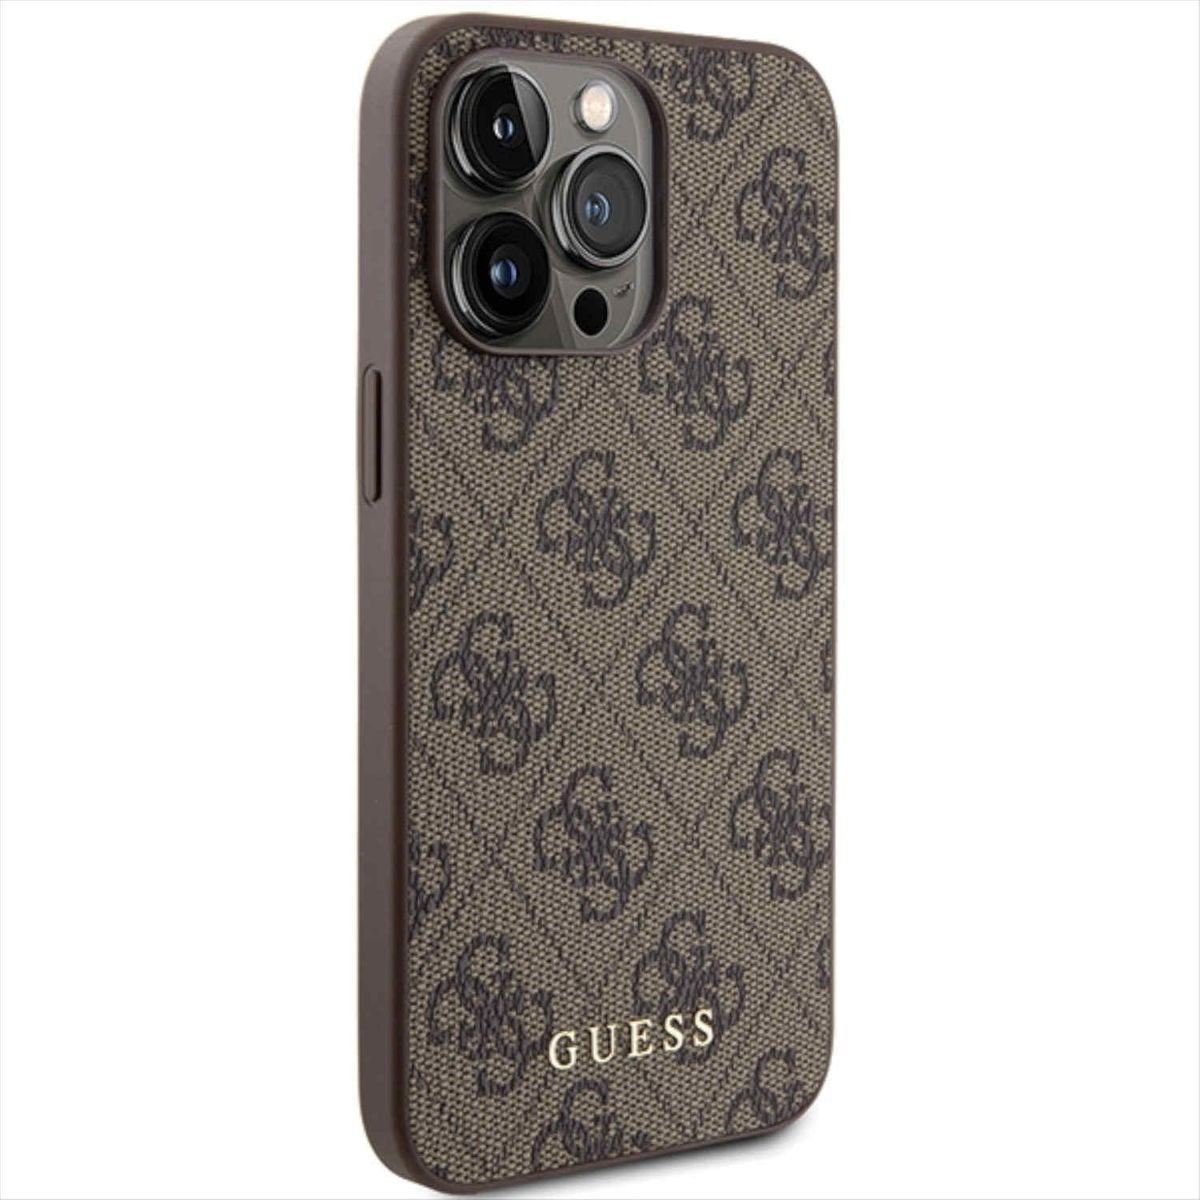 Gold Tasche Metal iPhone 4G Backcover, 15 Max, Braun Pro Apple, Hülle, GUESS Logo